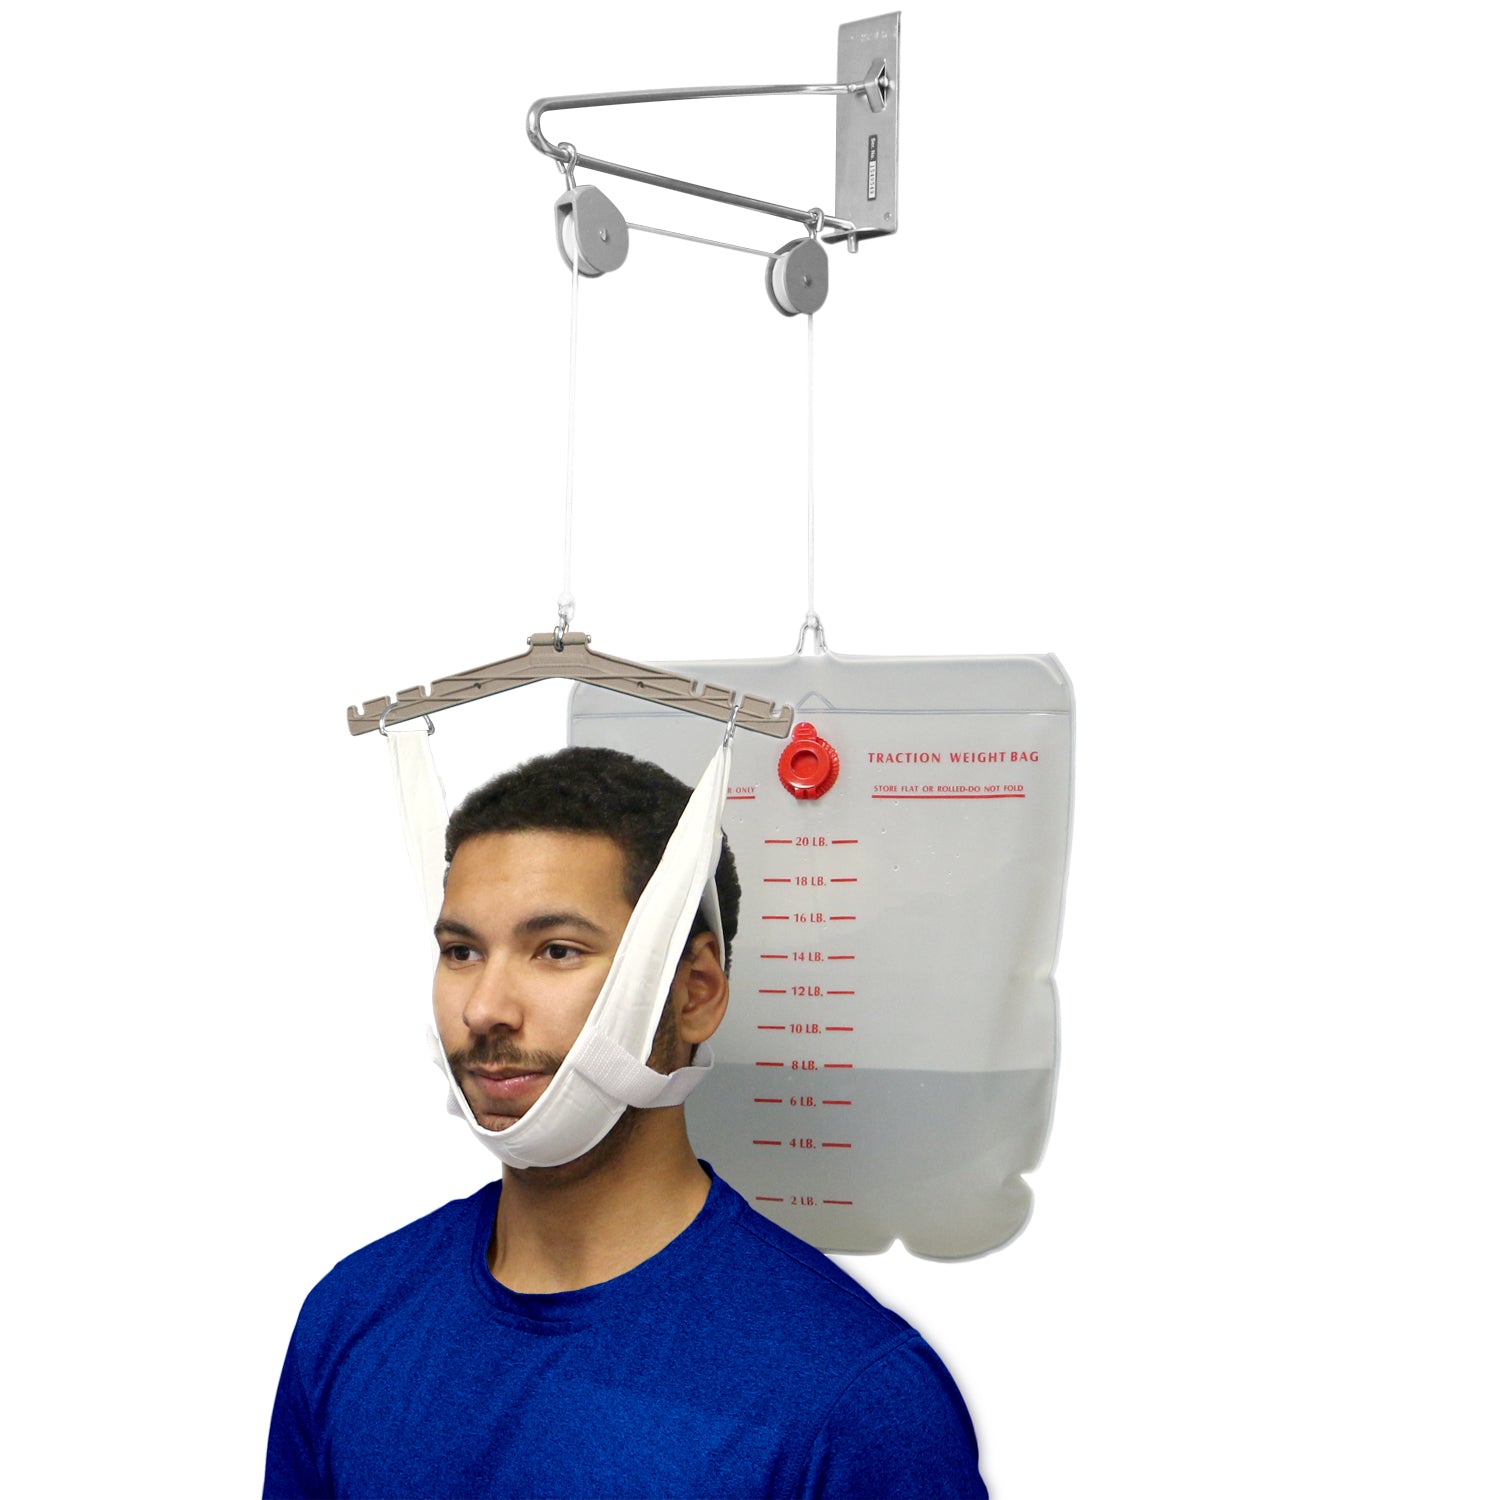 Featured Product for RA: Neck Traction Device (The Pain-Relieving